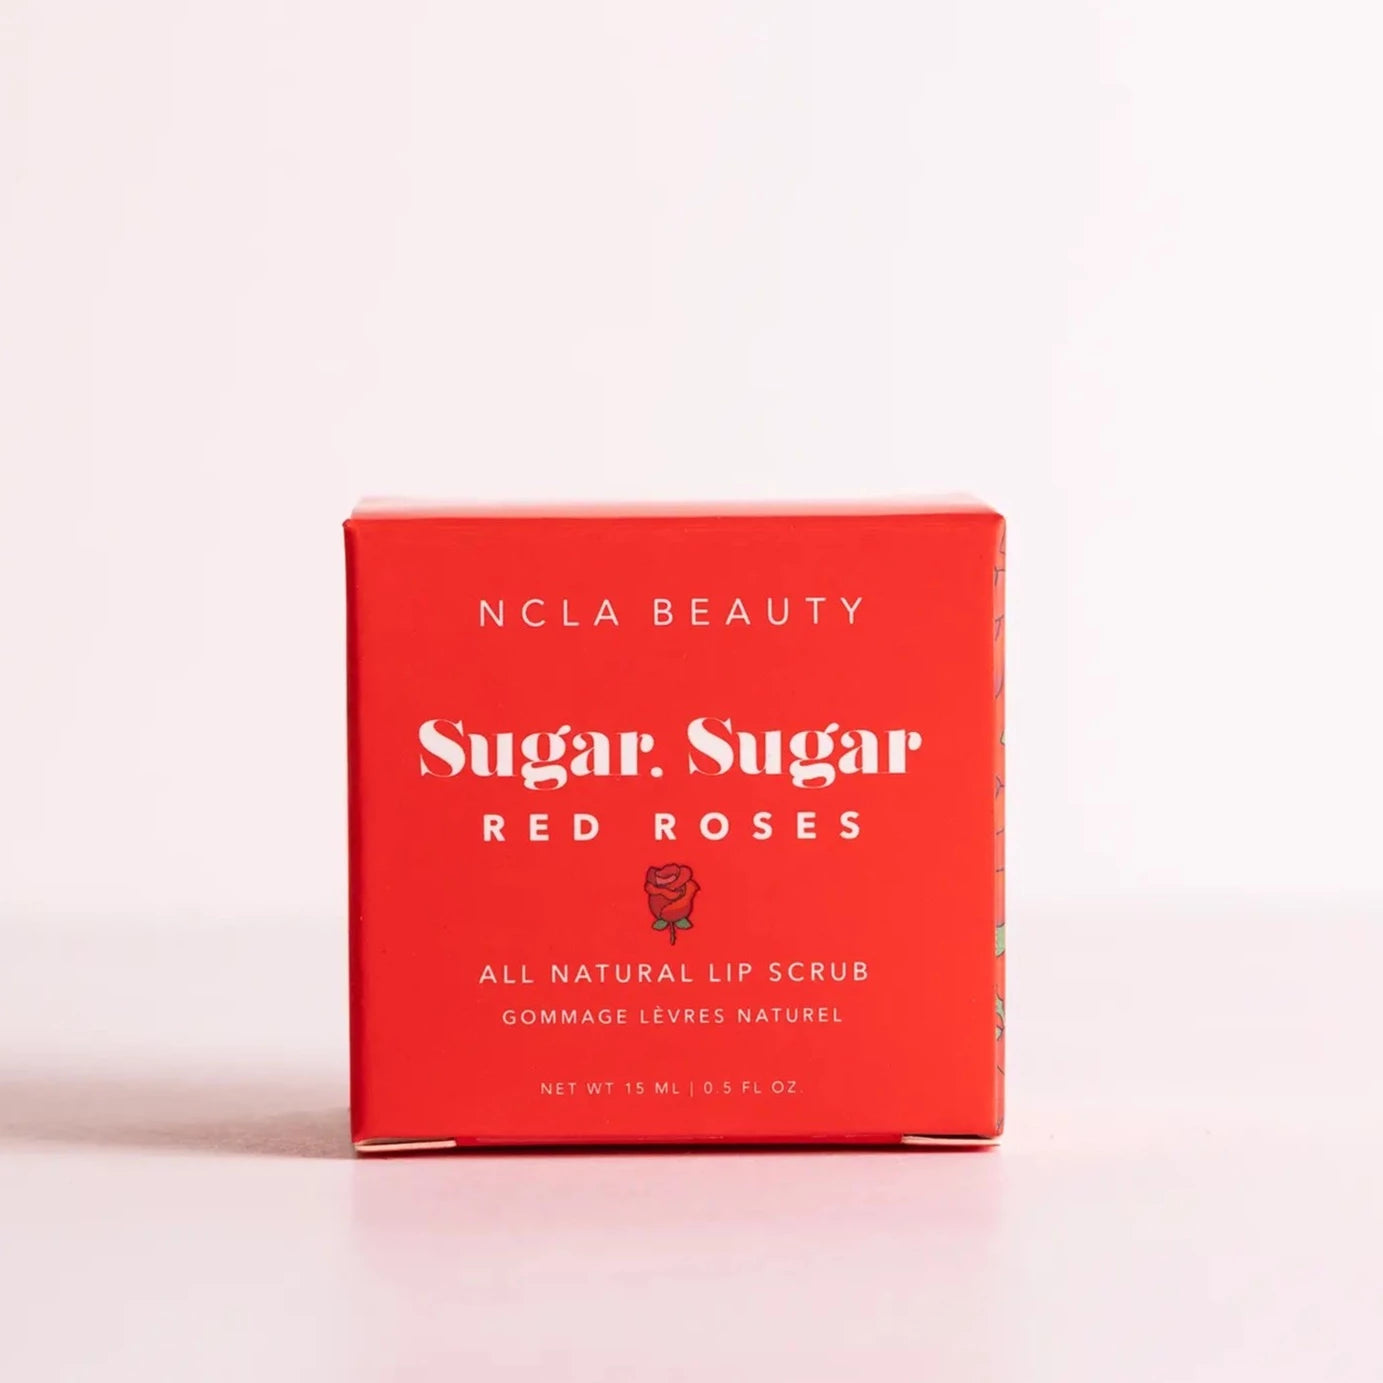 Red cube box packaging that has white text on the front that reads &quot;NCLA Beauty Sugar, Sugar Red Roses. All Natural Lip Scrub&quot;. Cover has a small red rose illustrated under the name